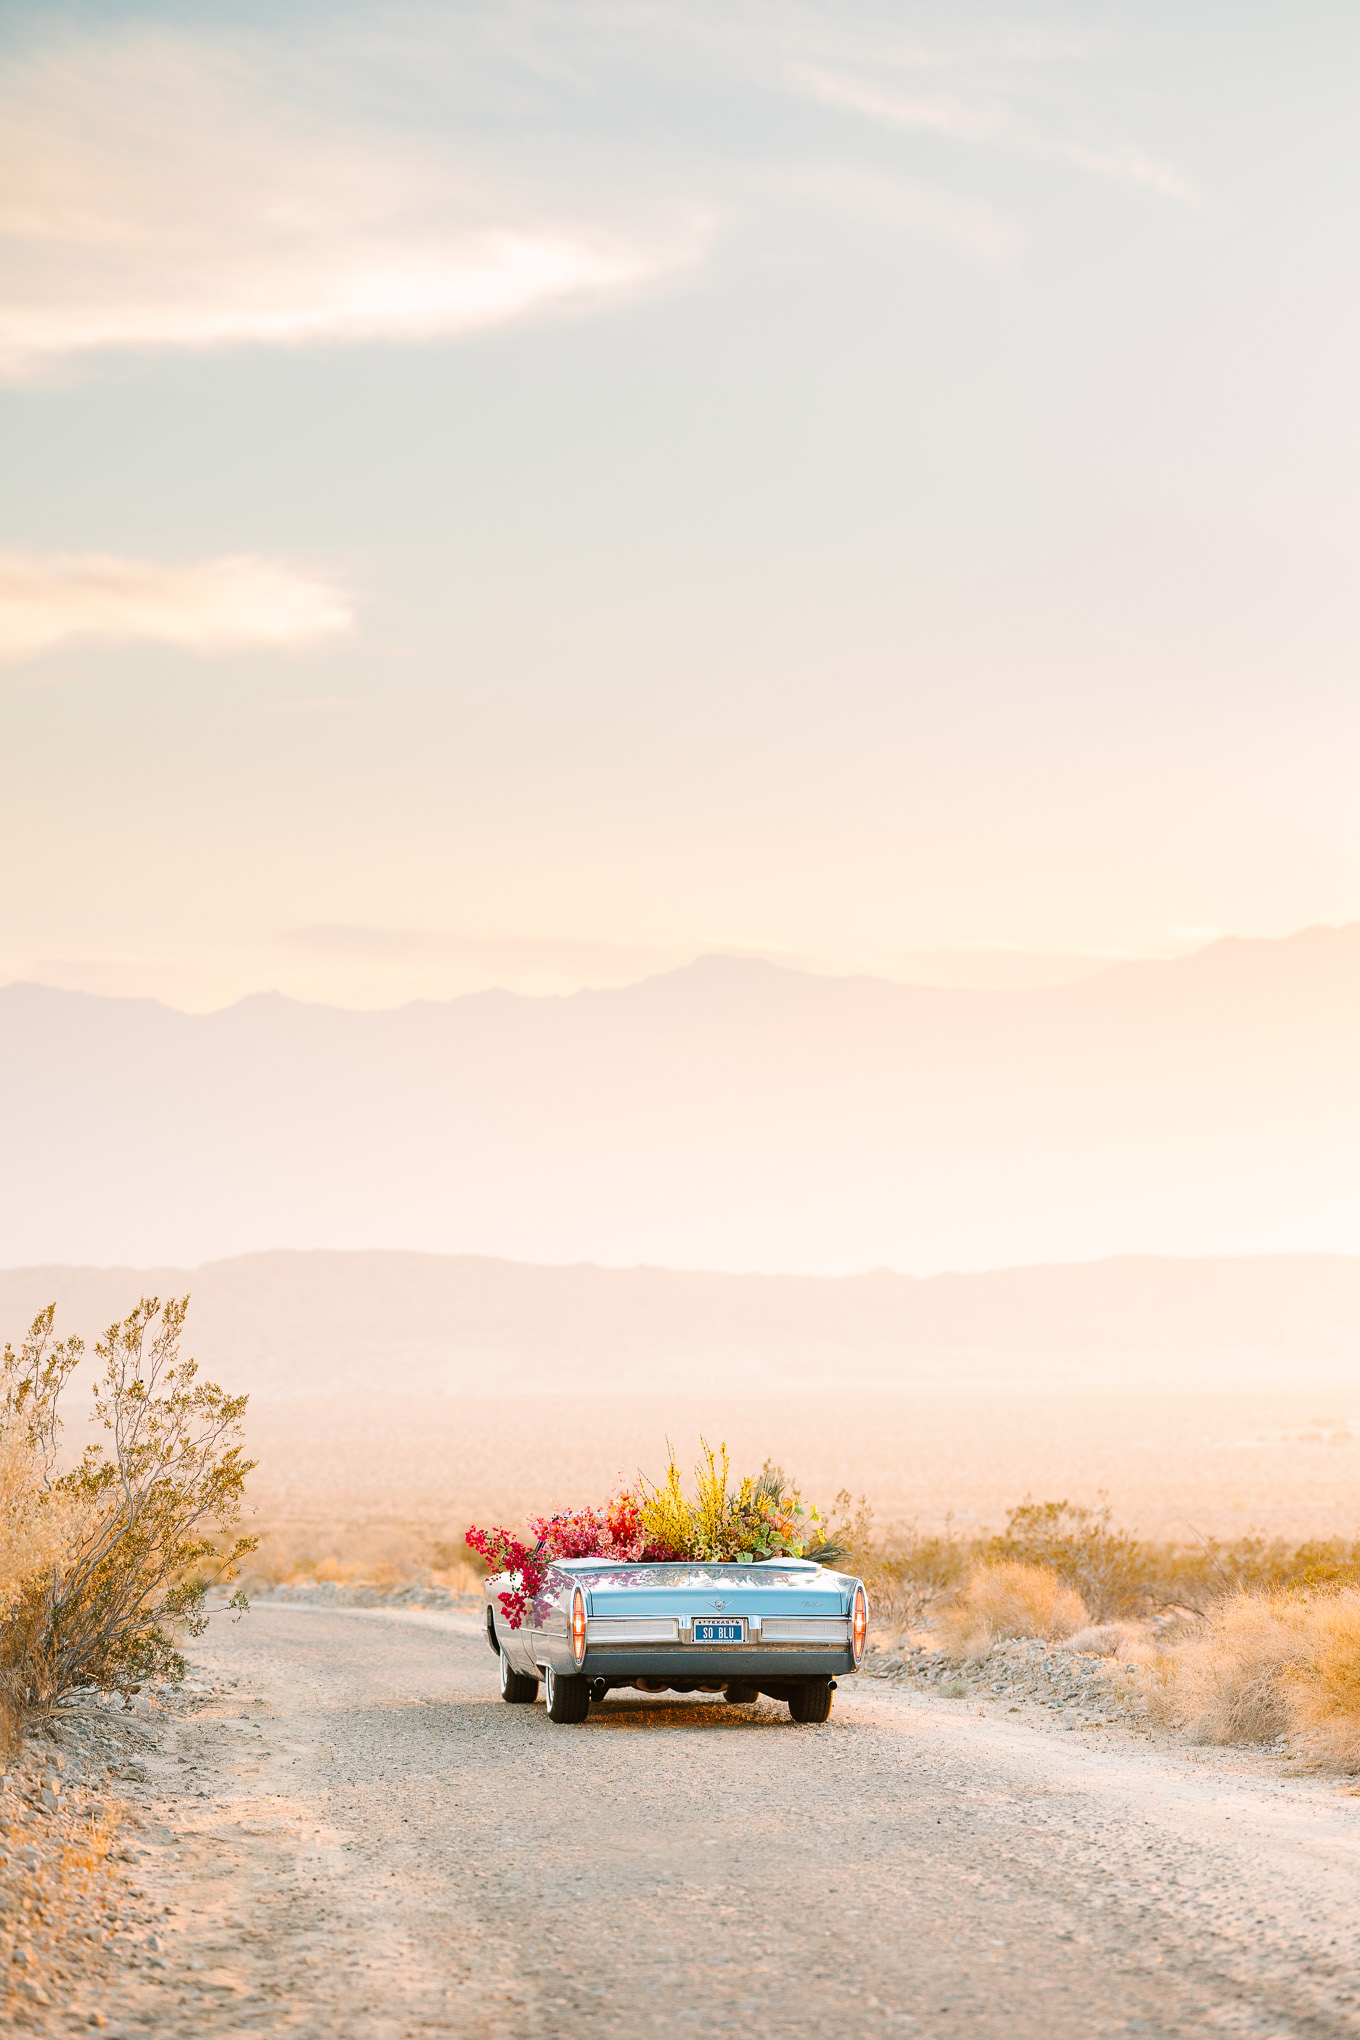 Blue classic Cadillac filled with flowers and disco balls | Kindred Presets x Mary Costa Photography Palm Springs Ad Campaign | Colorful Palm Springs wedding photography | #palmspringsphotographer #lightroompresets #sandshotel #pinkhotel   Source: Mary Costa Photography | Los Angeles